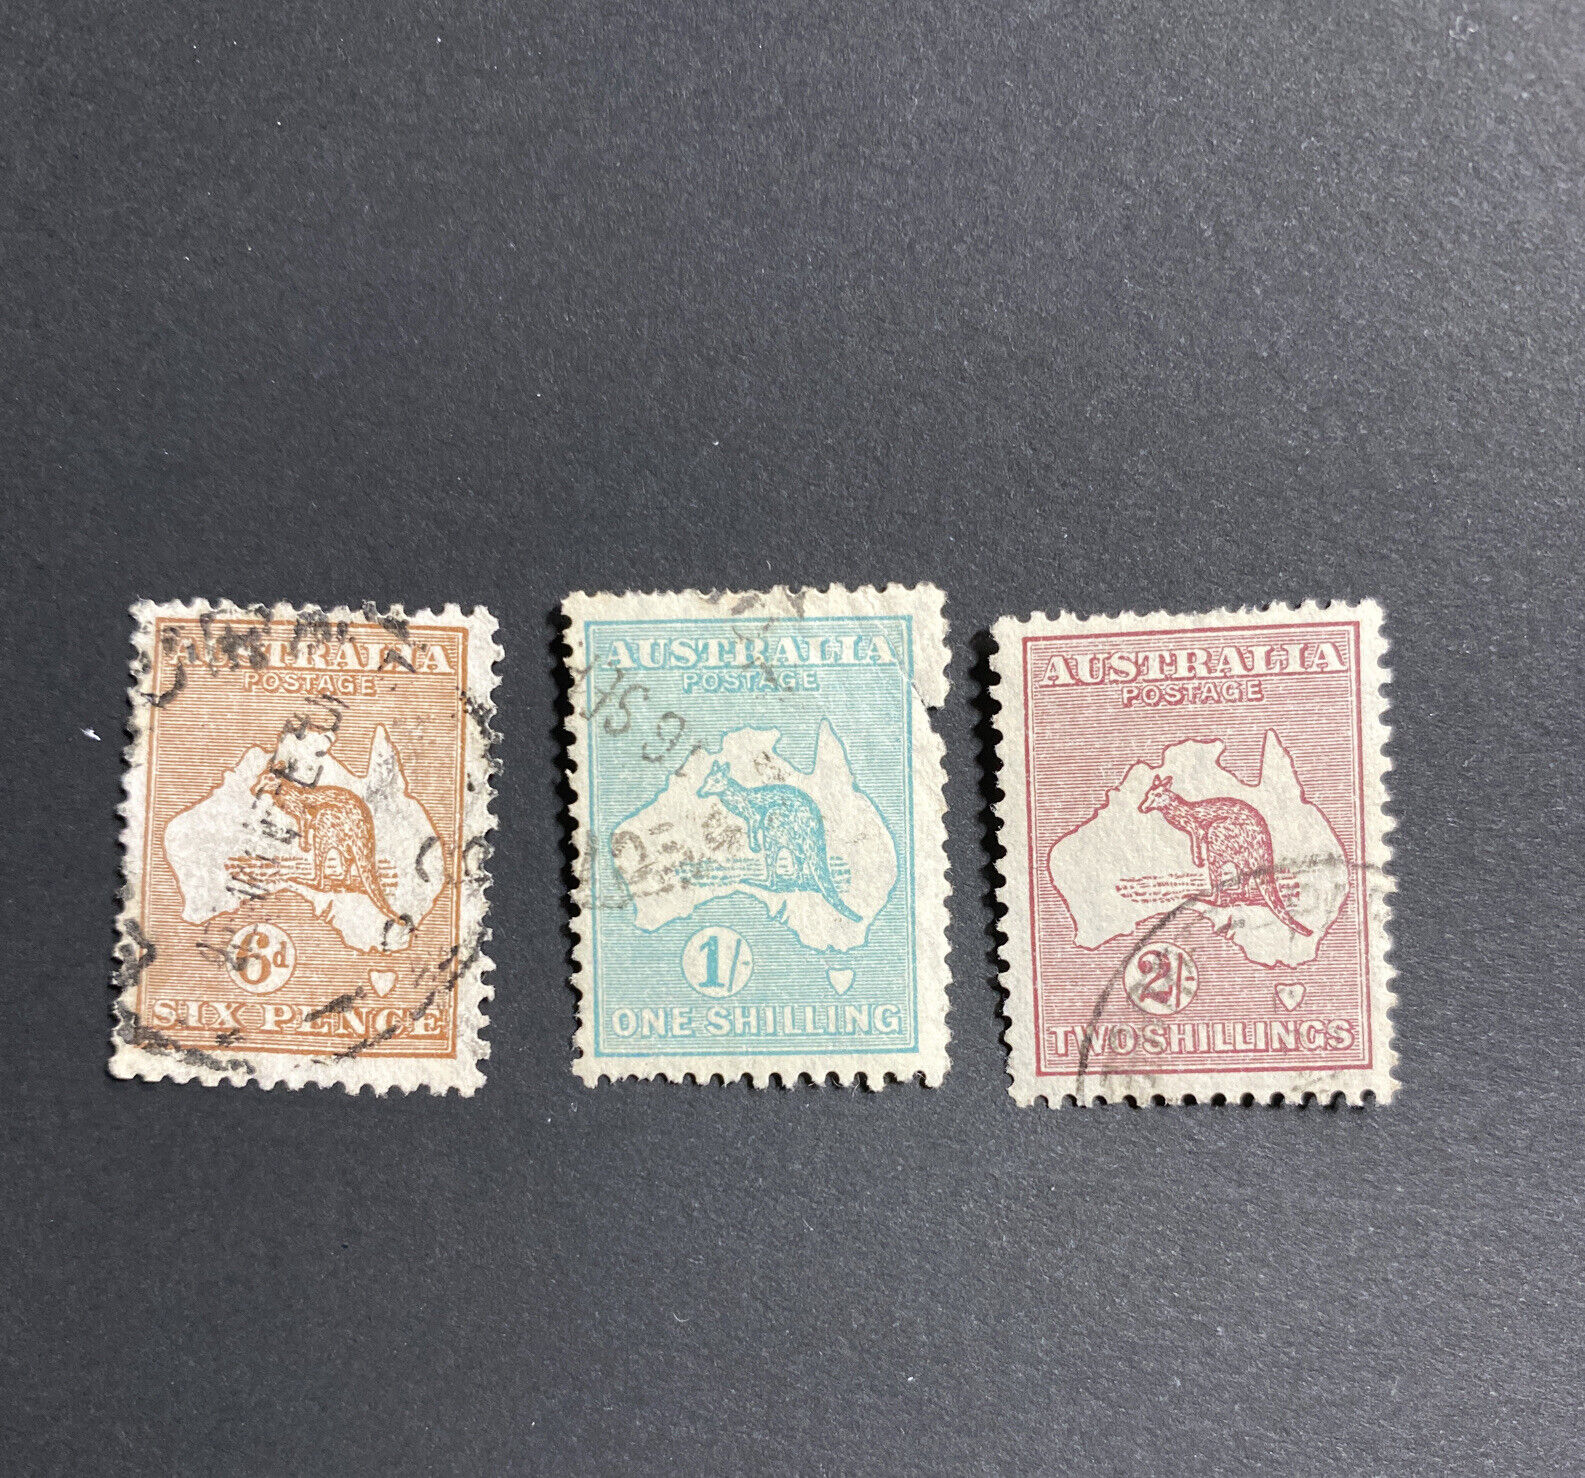 Tgstamp: Australia Stamps #96, 98, 99 Used With Faults